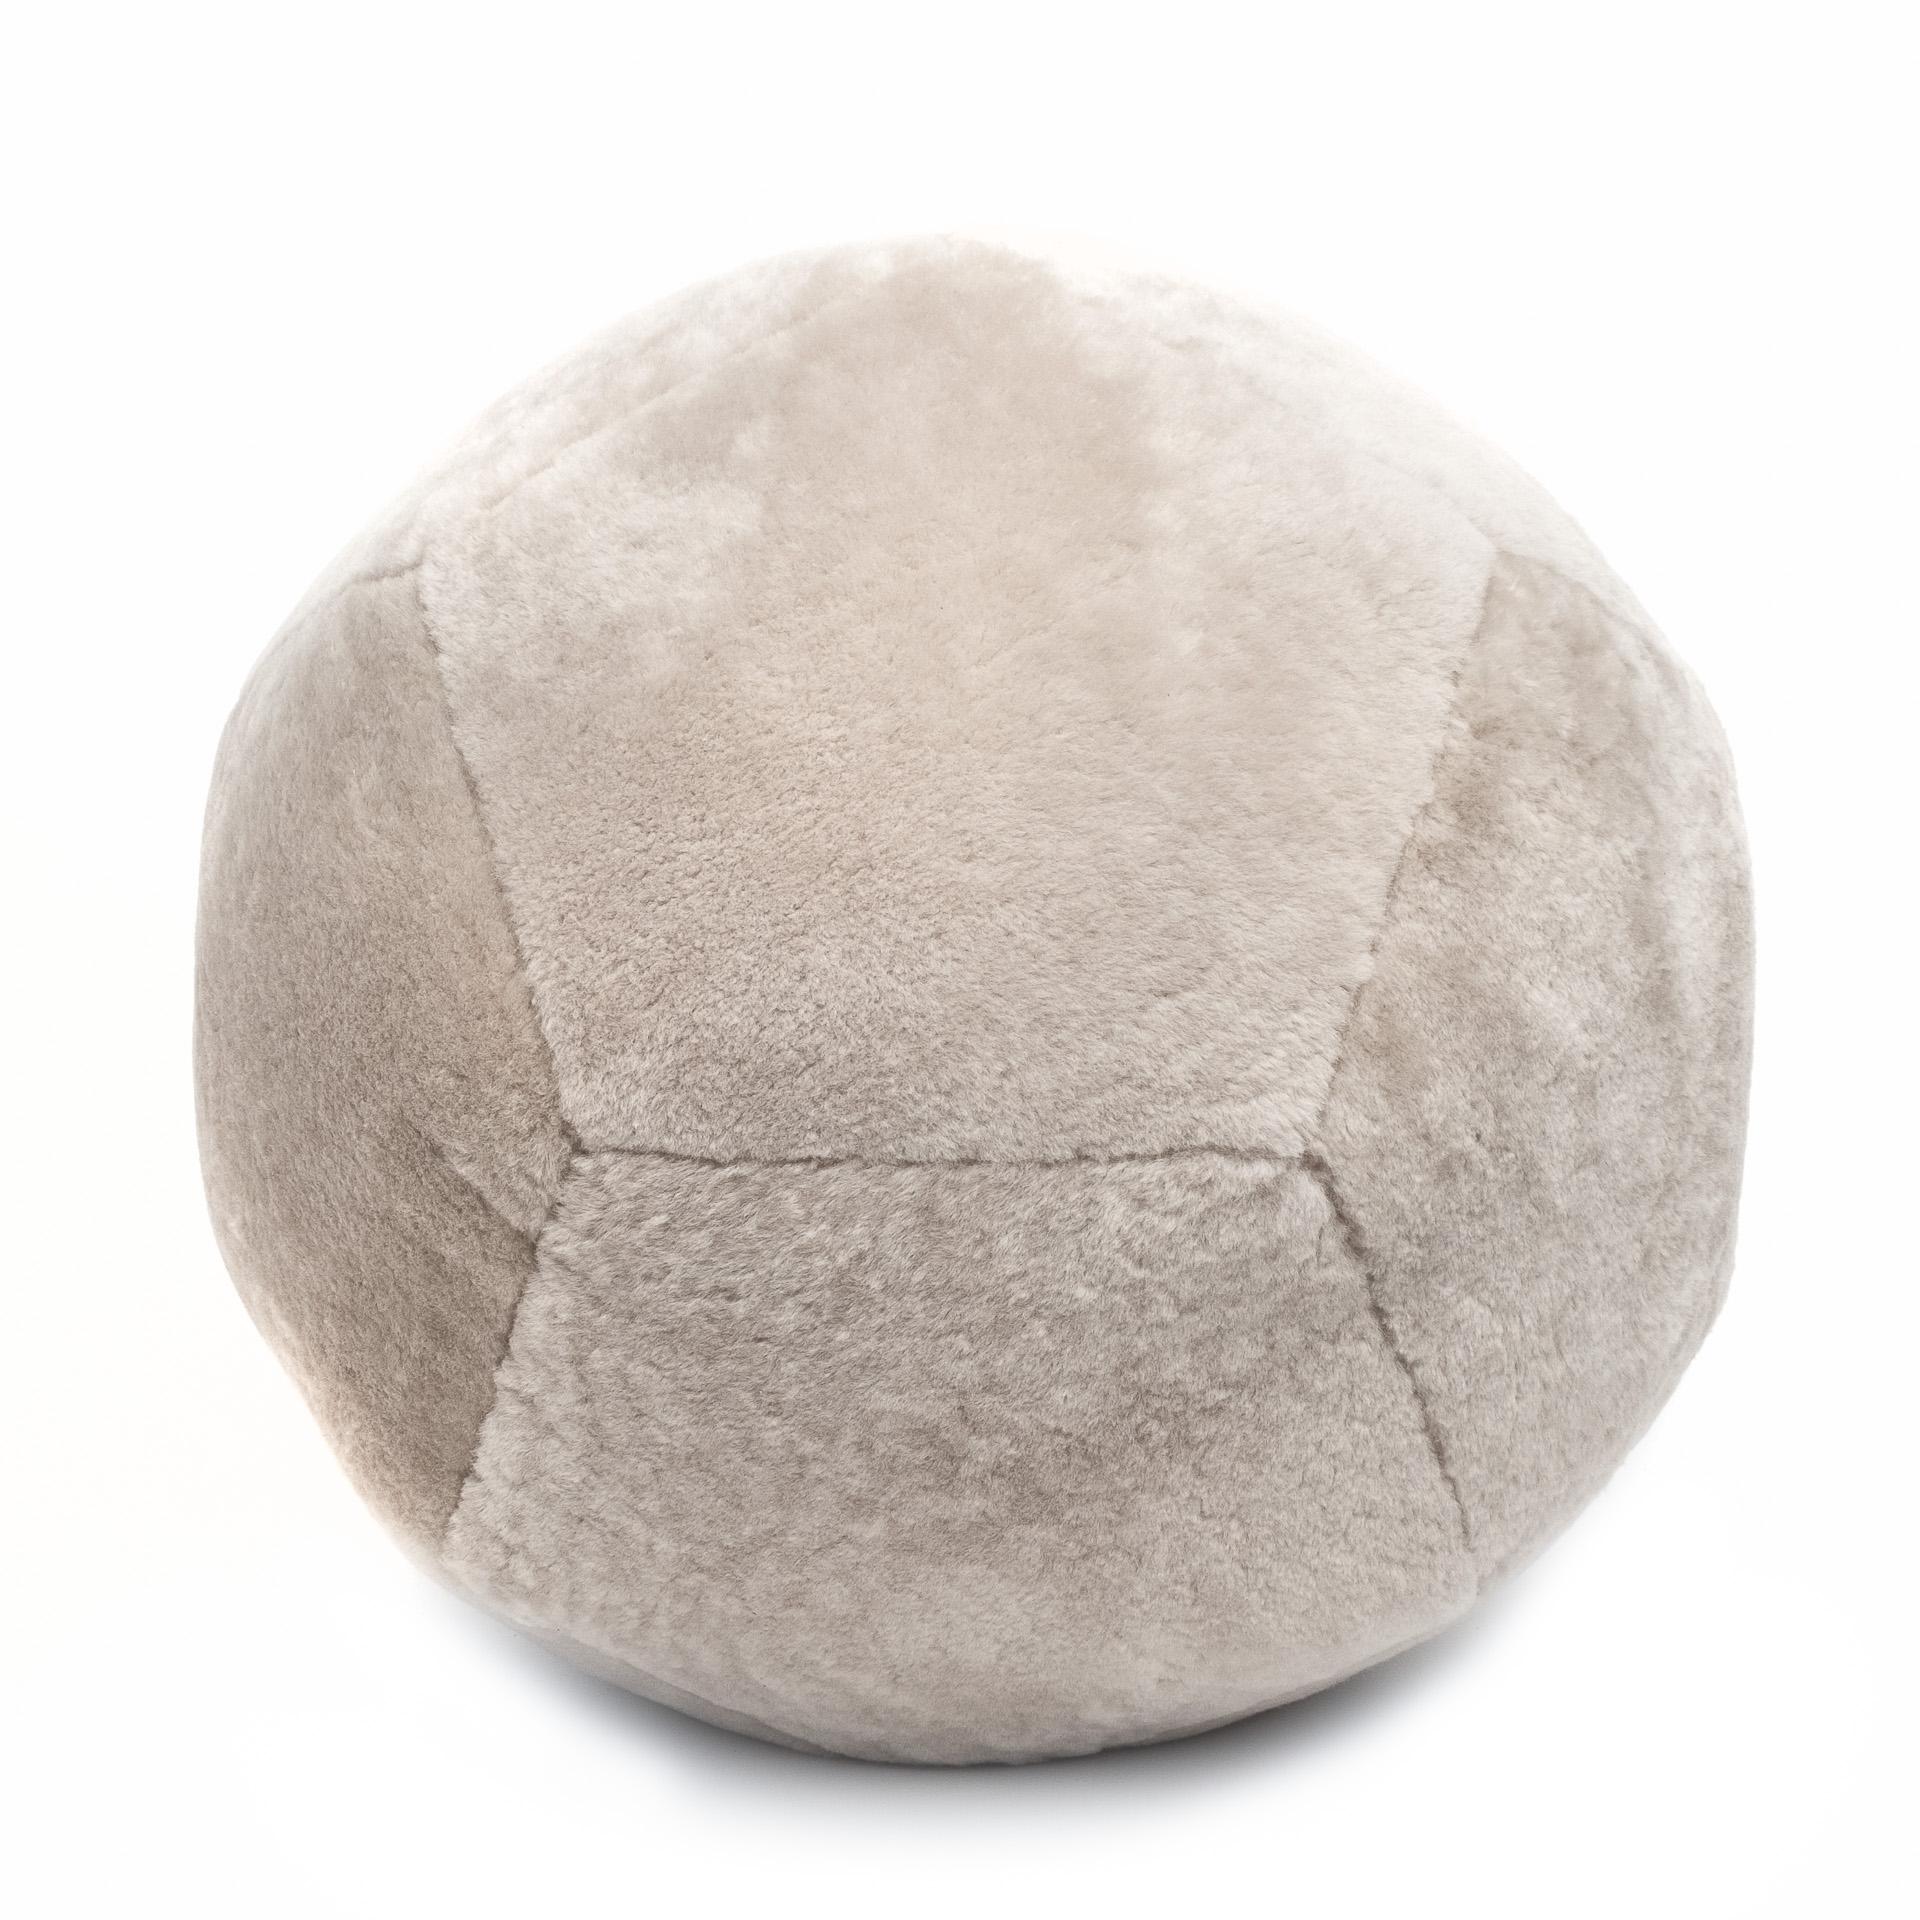 Featured in shearling, the Ottoman X is inspired by fundamental geometry. These structured and supportive round ball ottomans are designed to function as a traditional leg rest, add a twist to secondary living room seating, or as playful and